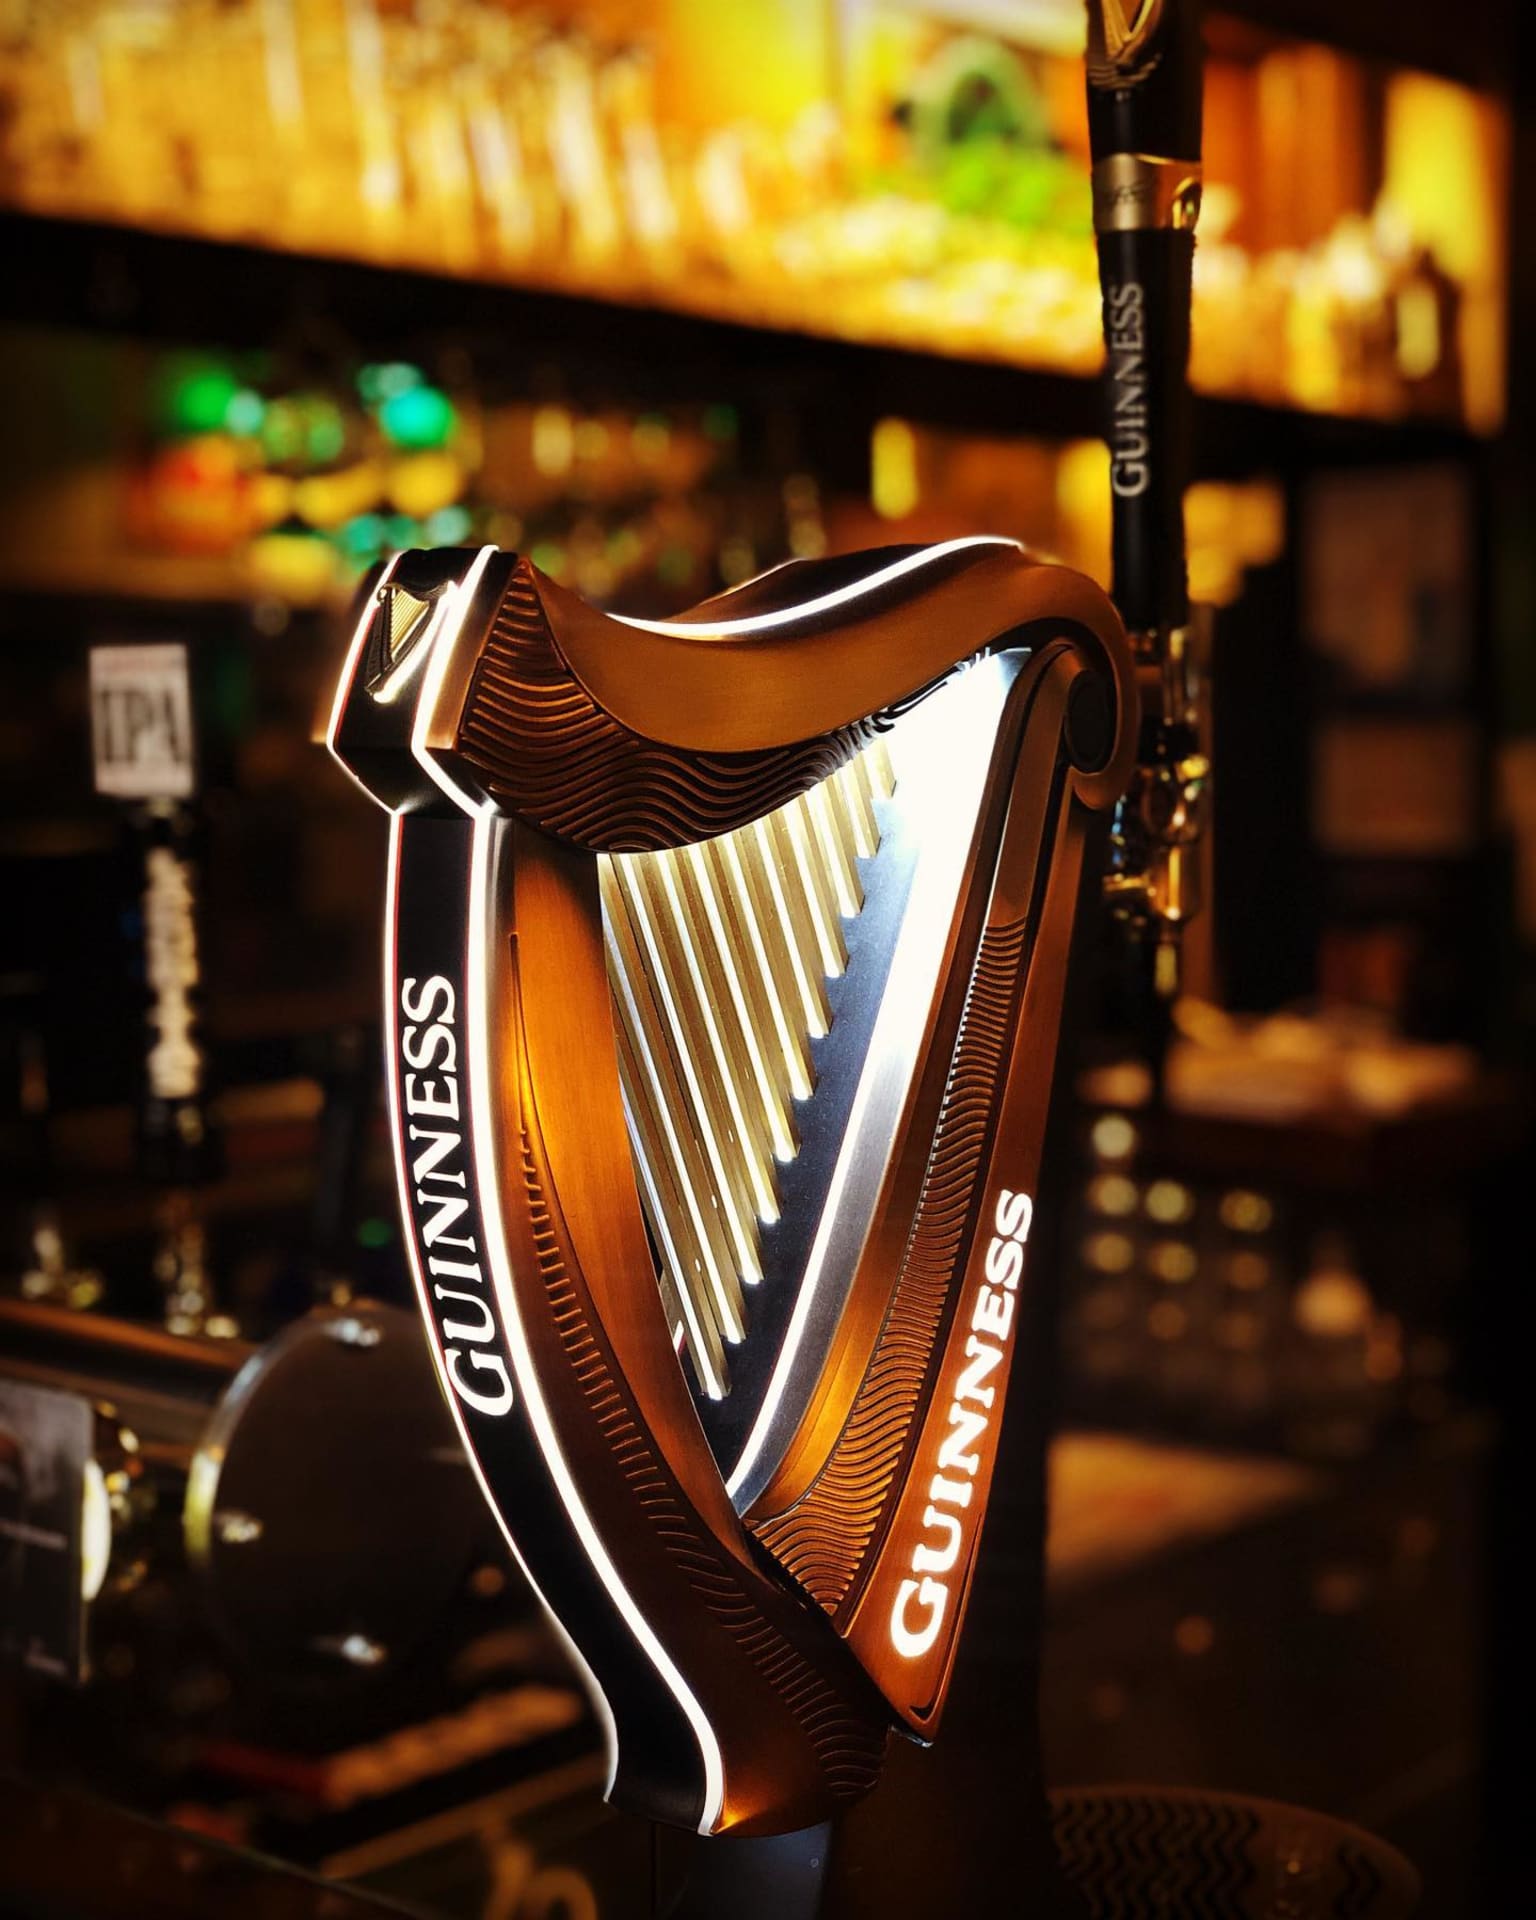 Iconic Guinness on tap!